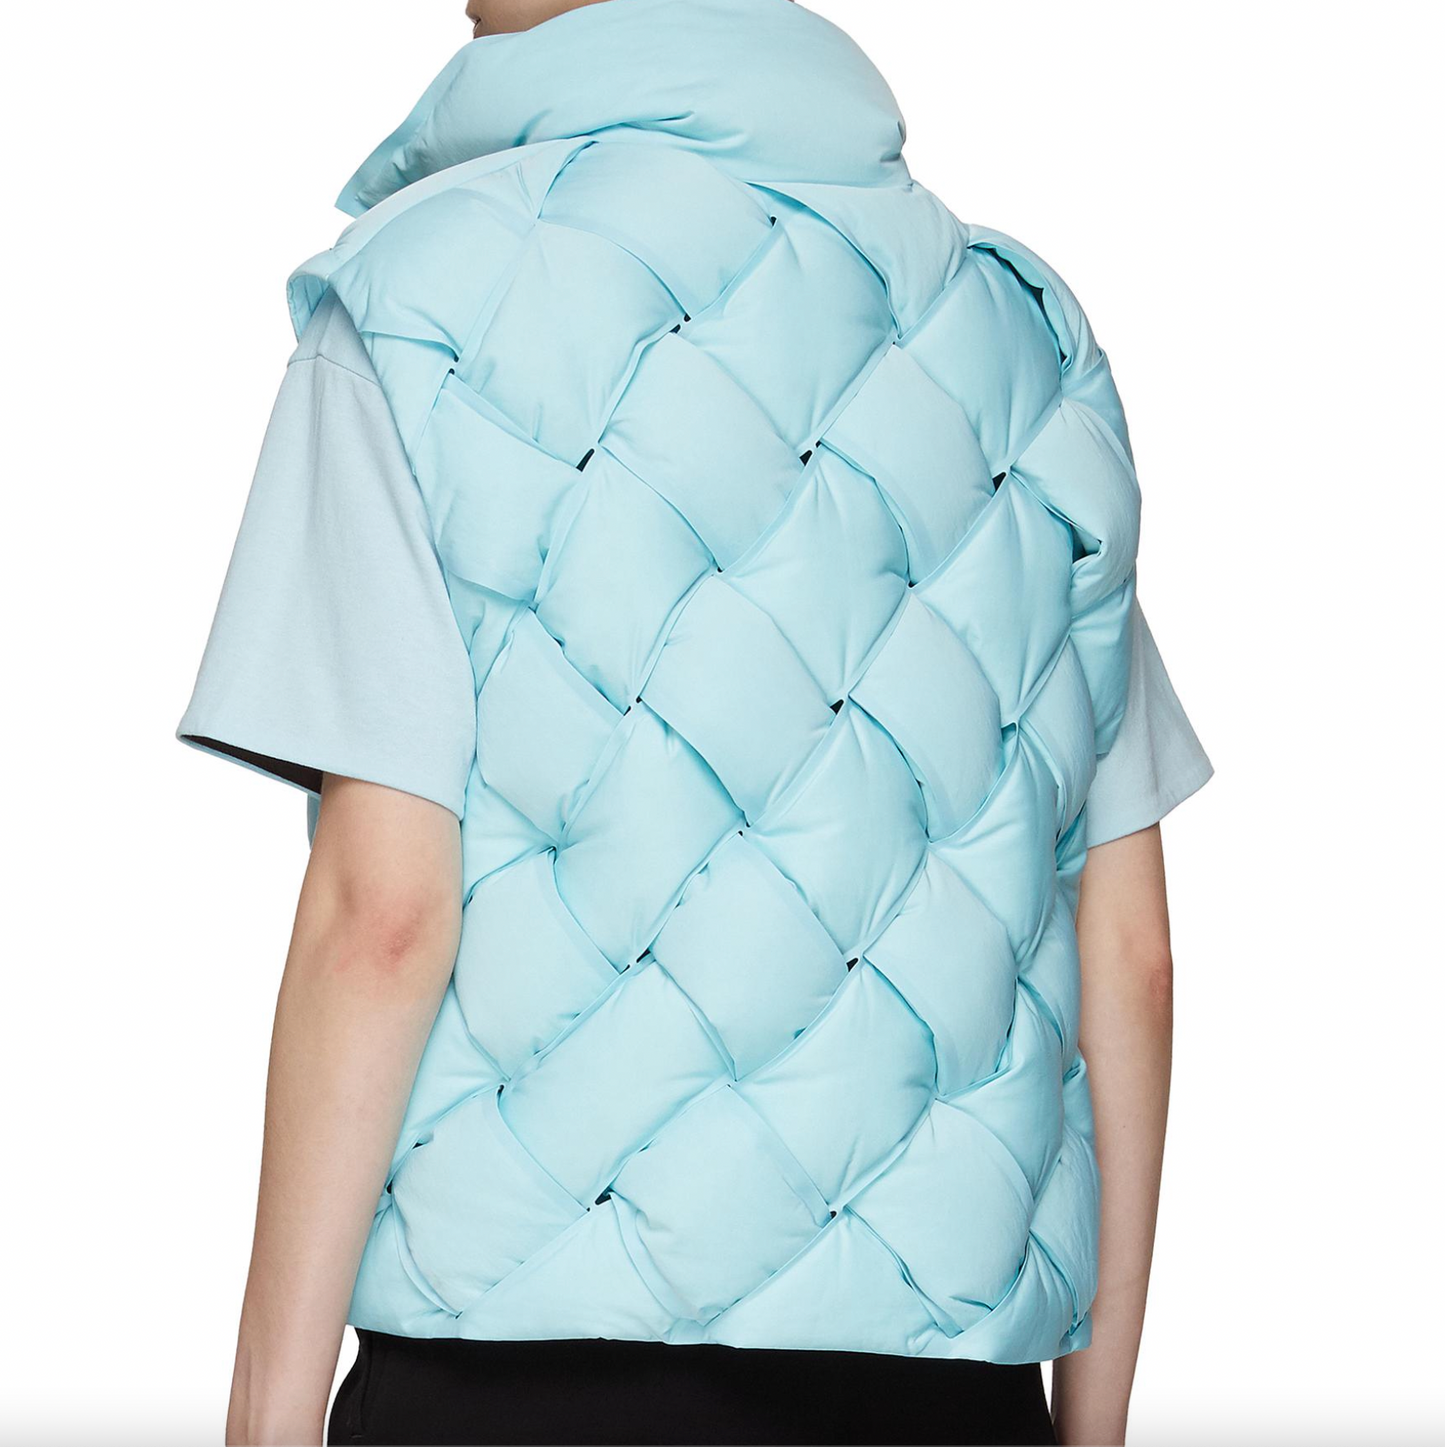 INTRECCIATO PADDED SHELL GILET - PALE BLUE